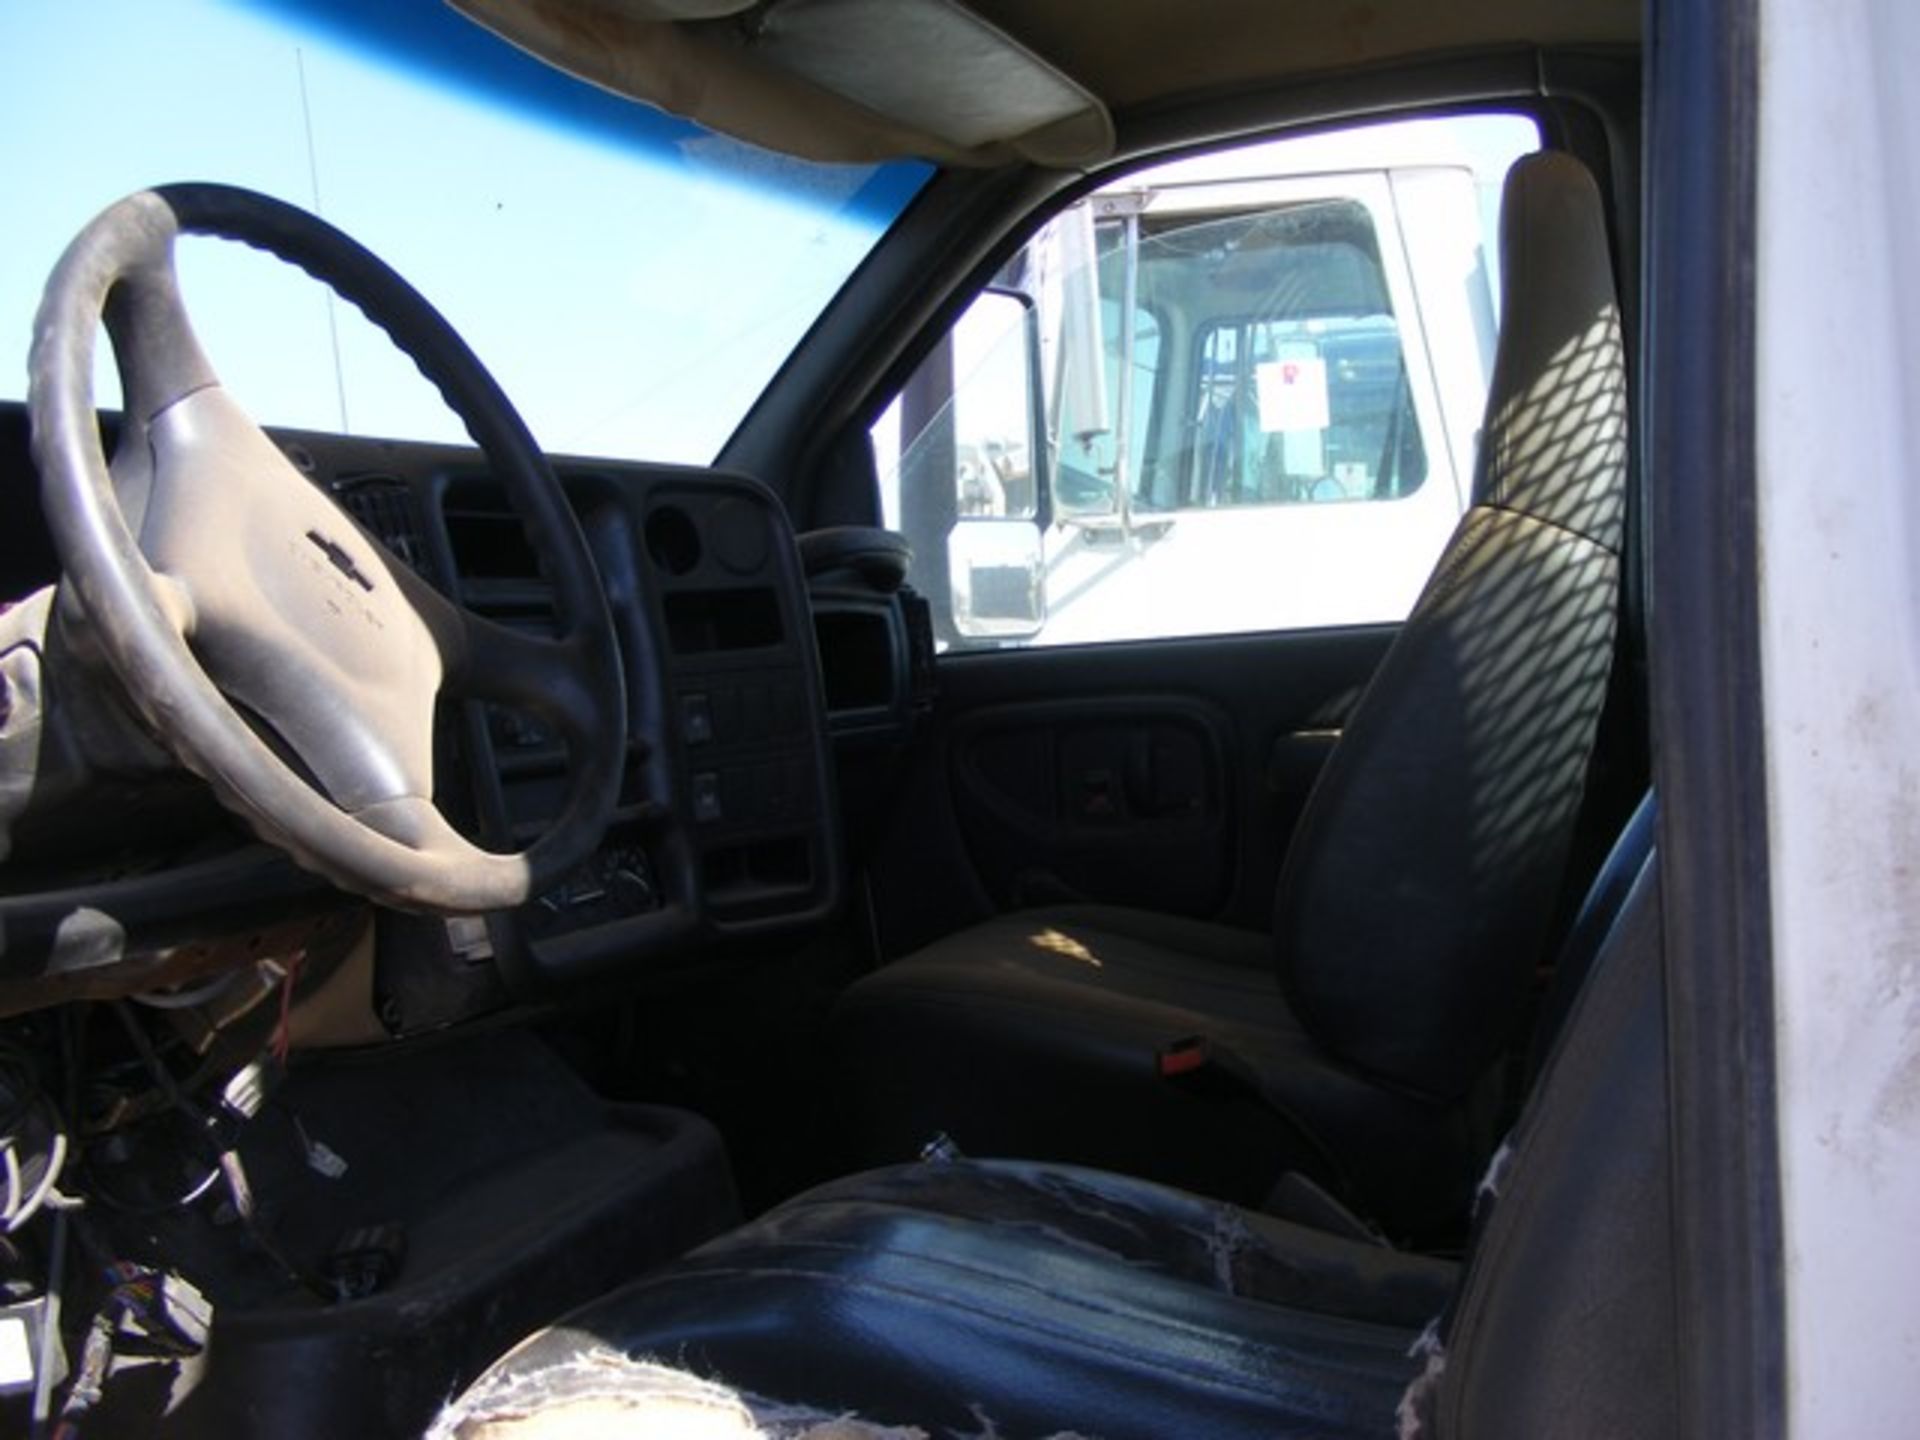 Located in YARD 1 - Midland, TX (2395) (X) 2006 CHEVROLET C7500 S/A DAY CAB STAKE BED TRUCK, VIN- - Image 7 of 10